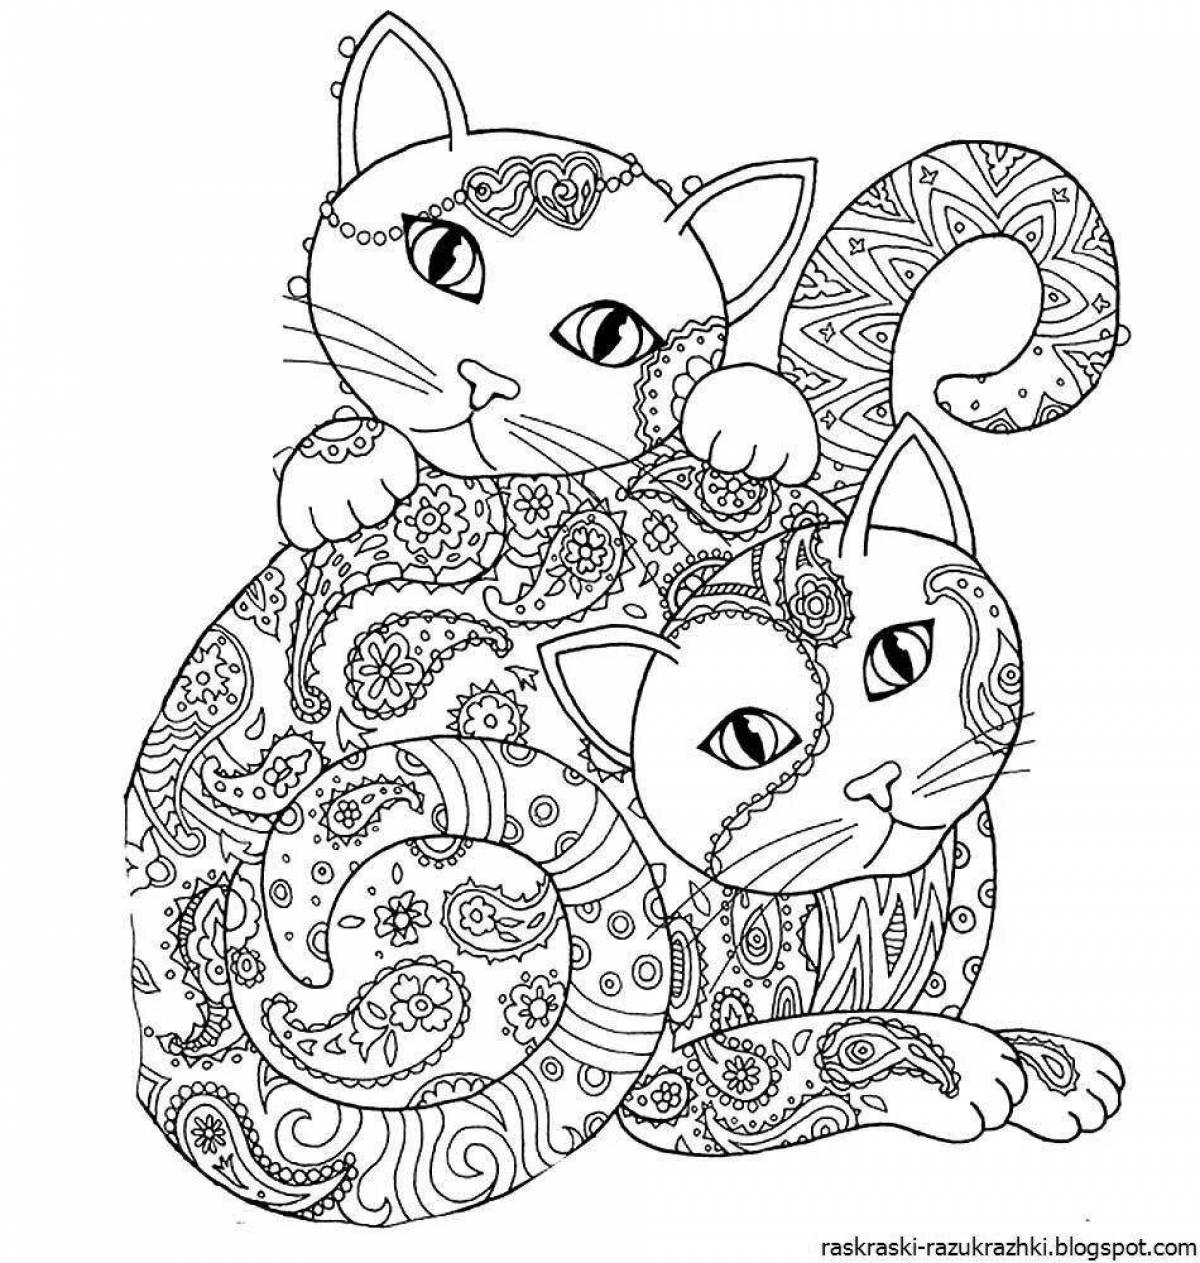 Joyful coloring for girls 12 years old, cute cats